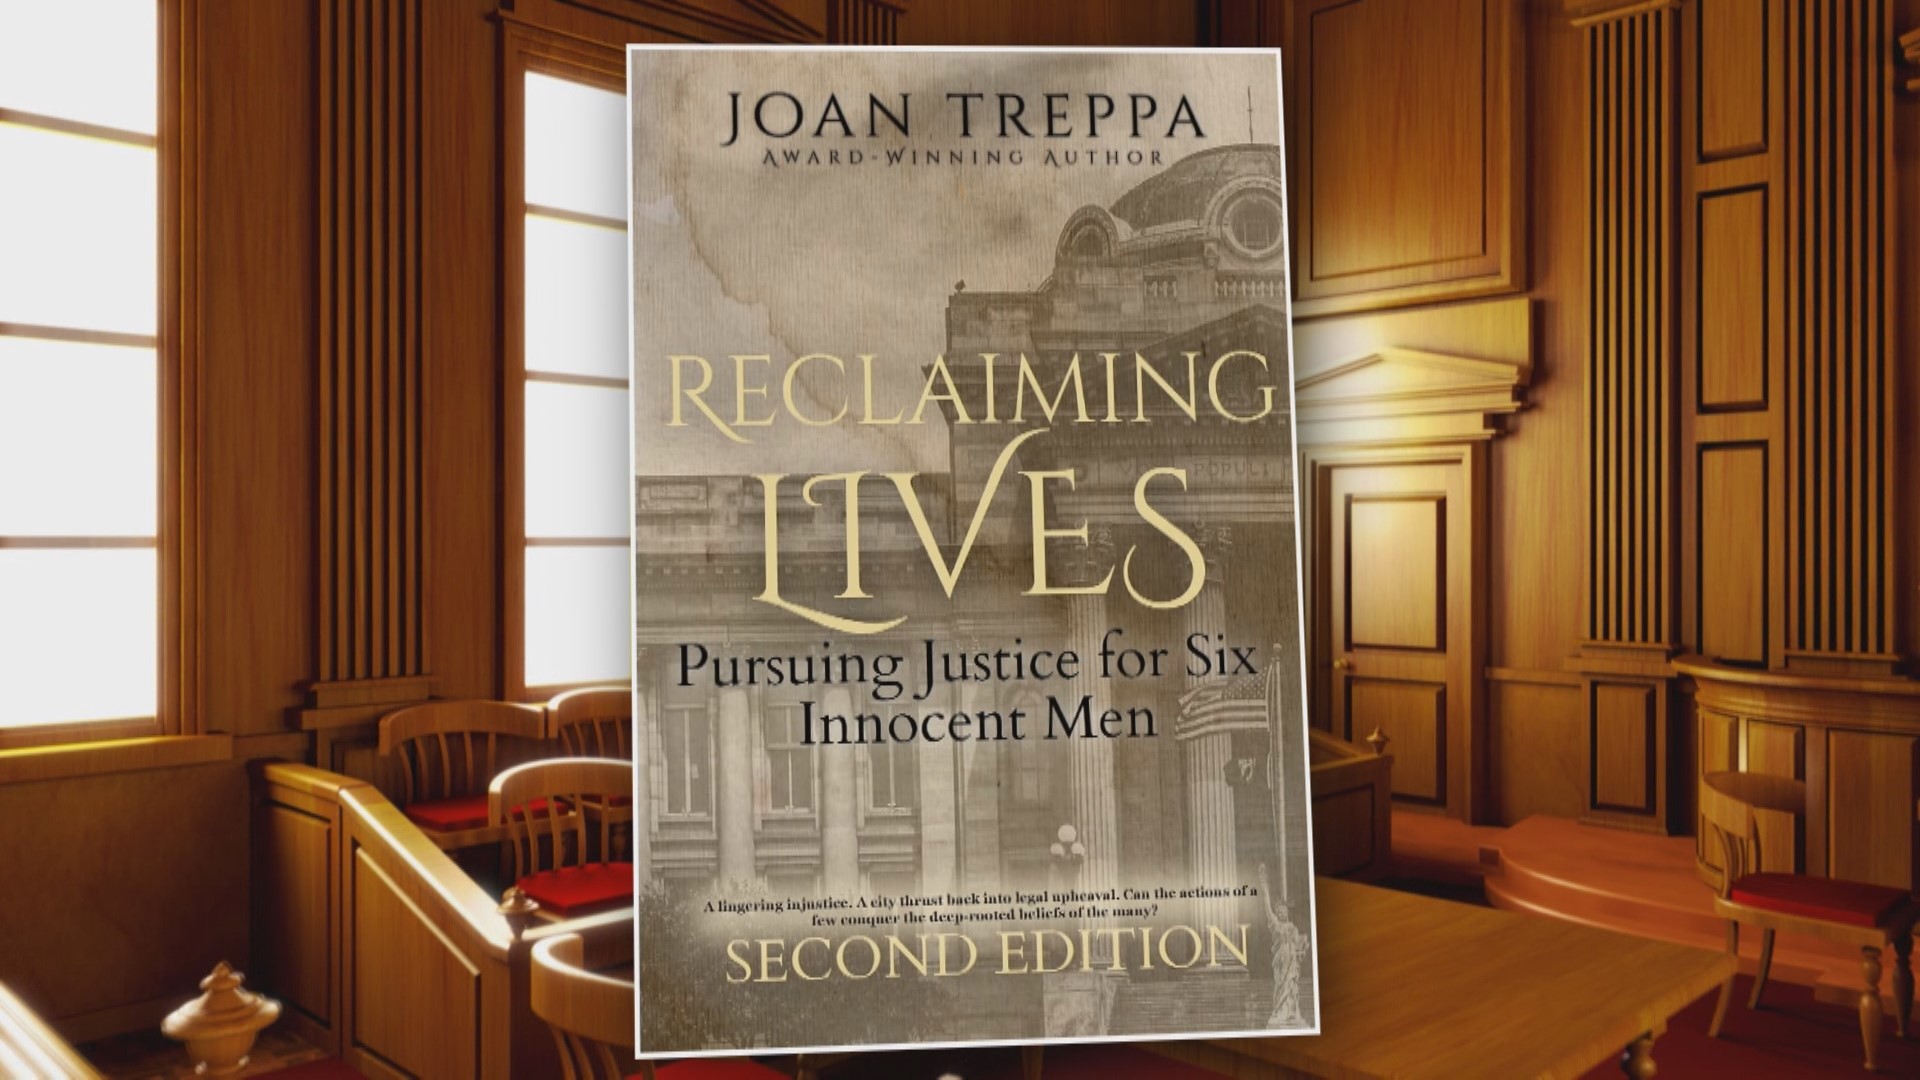 The book club chats with author Joan Treppa about this month's featured selection.